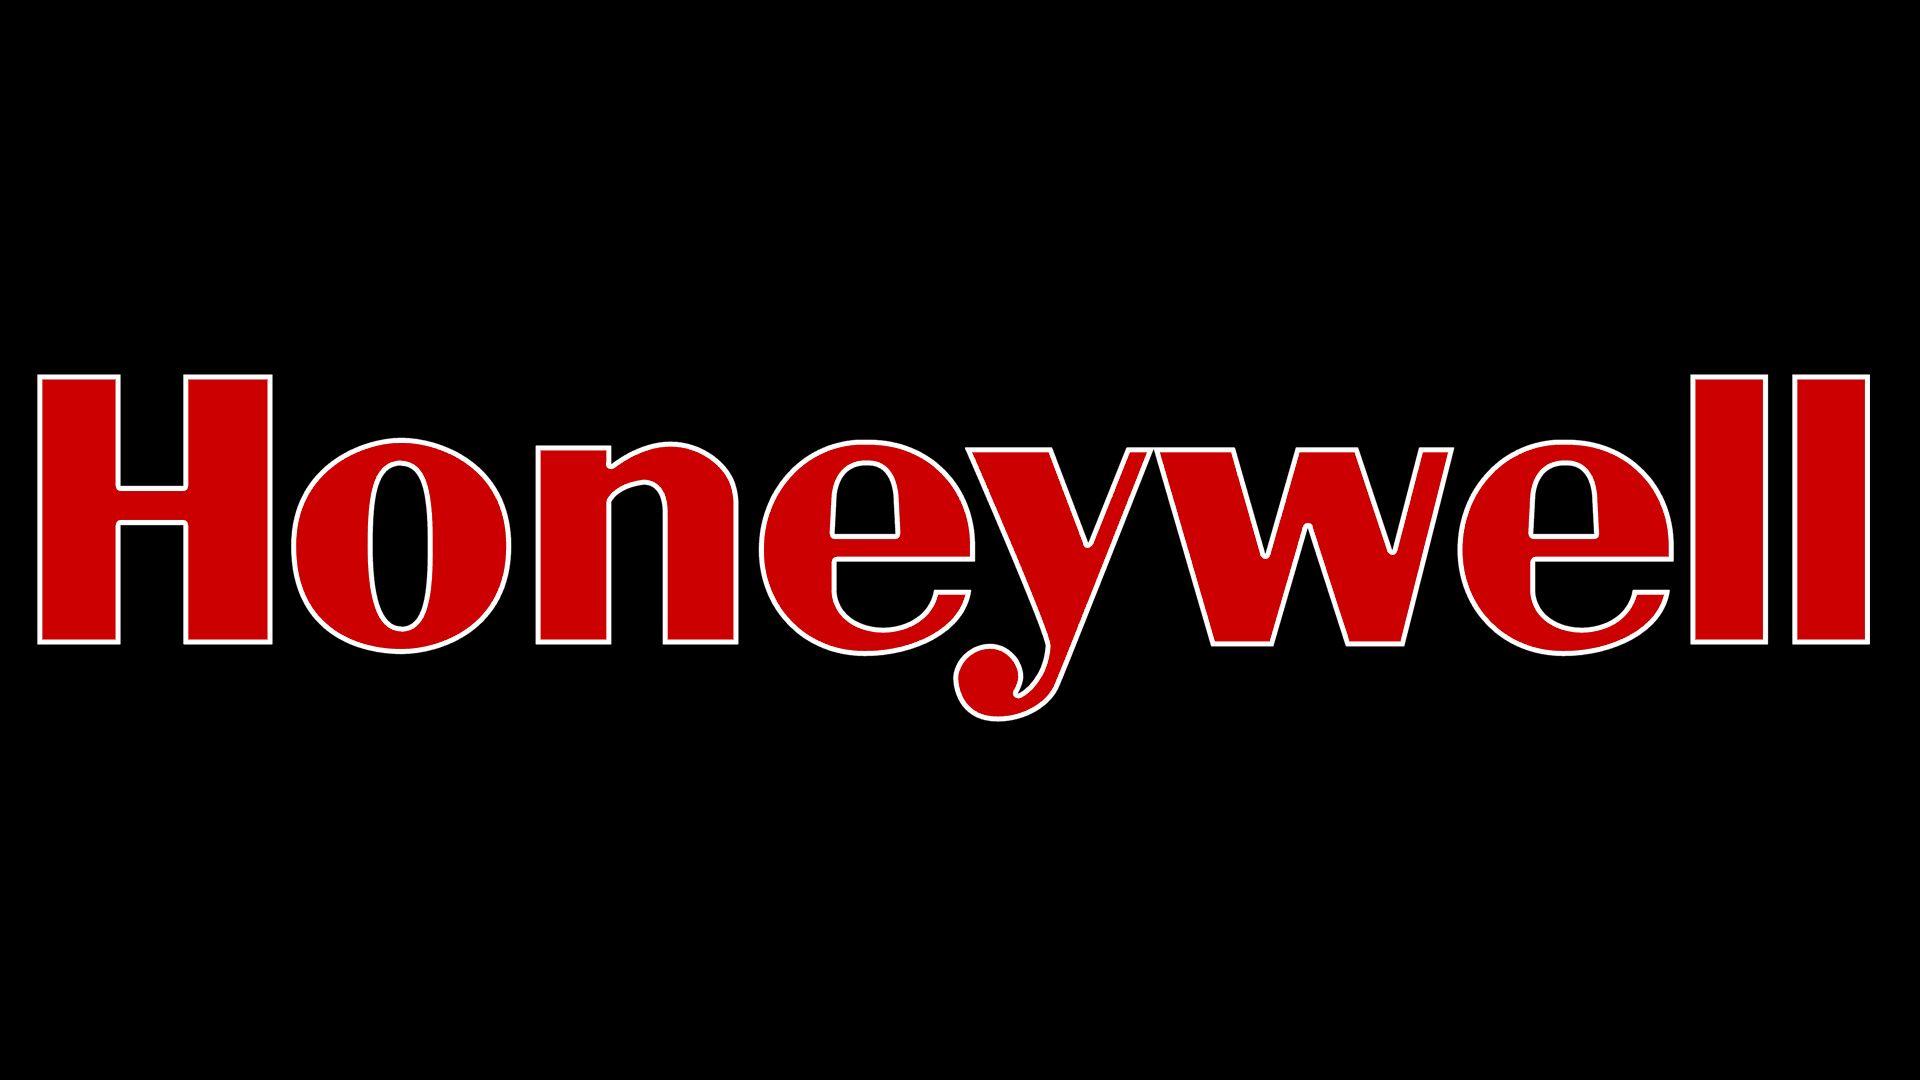 Honeywell Logo - Honeywell Logo, Honeywell Symbol, Meaning, History and Evolution